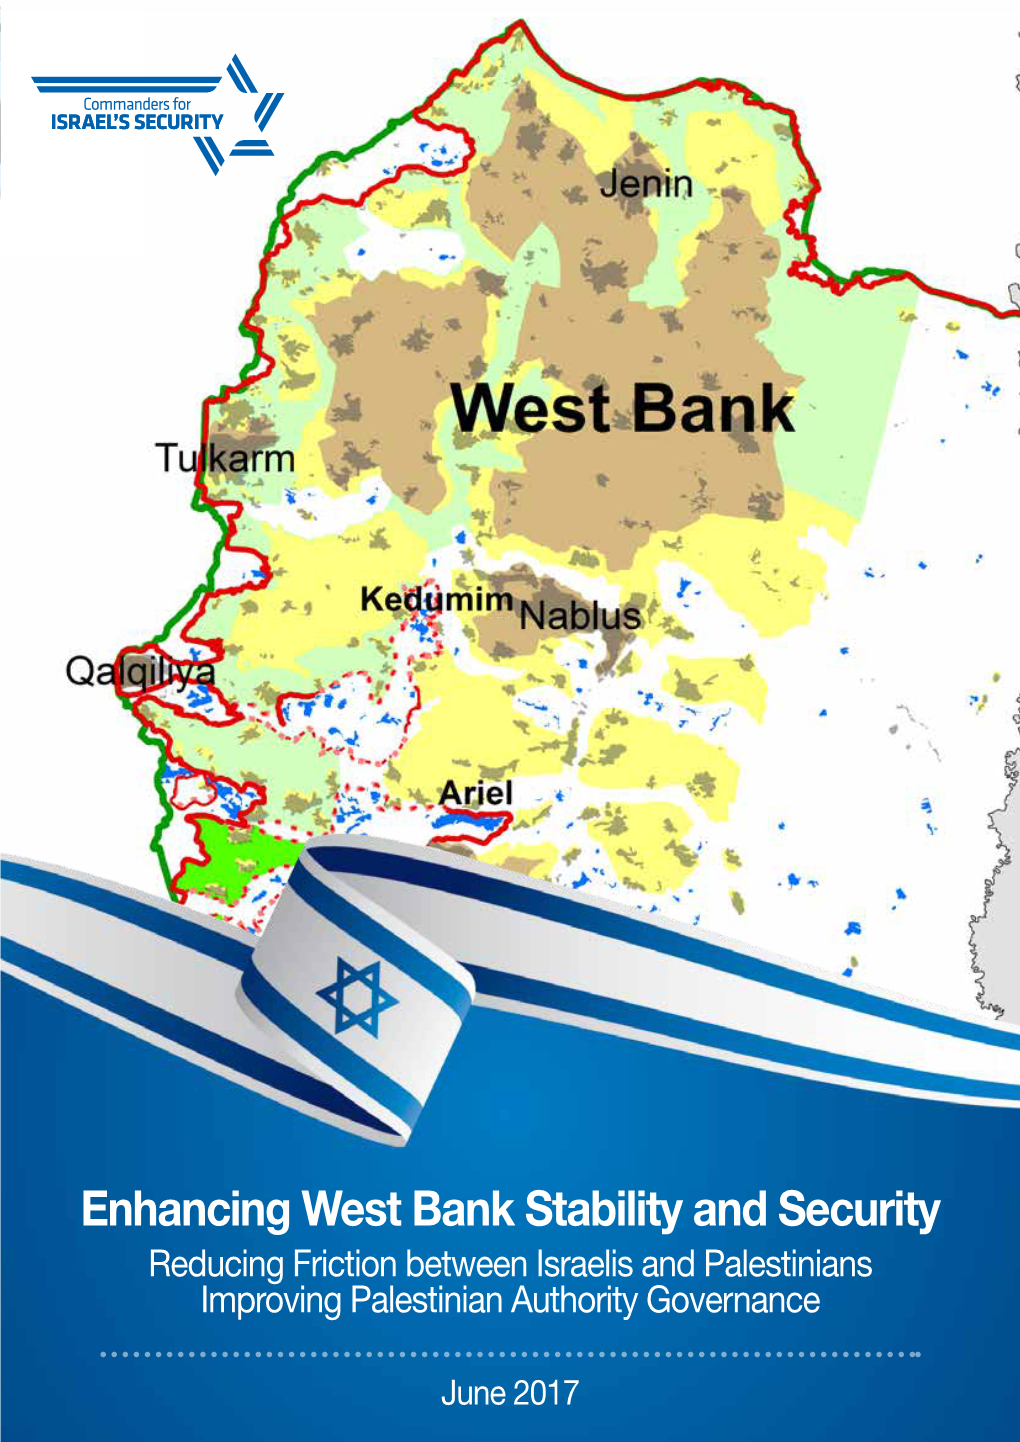 Enhancing West Bank Stability and Security Reducing Friction Between Israelis and Palestinians Improving Palestinian Authority Governance